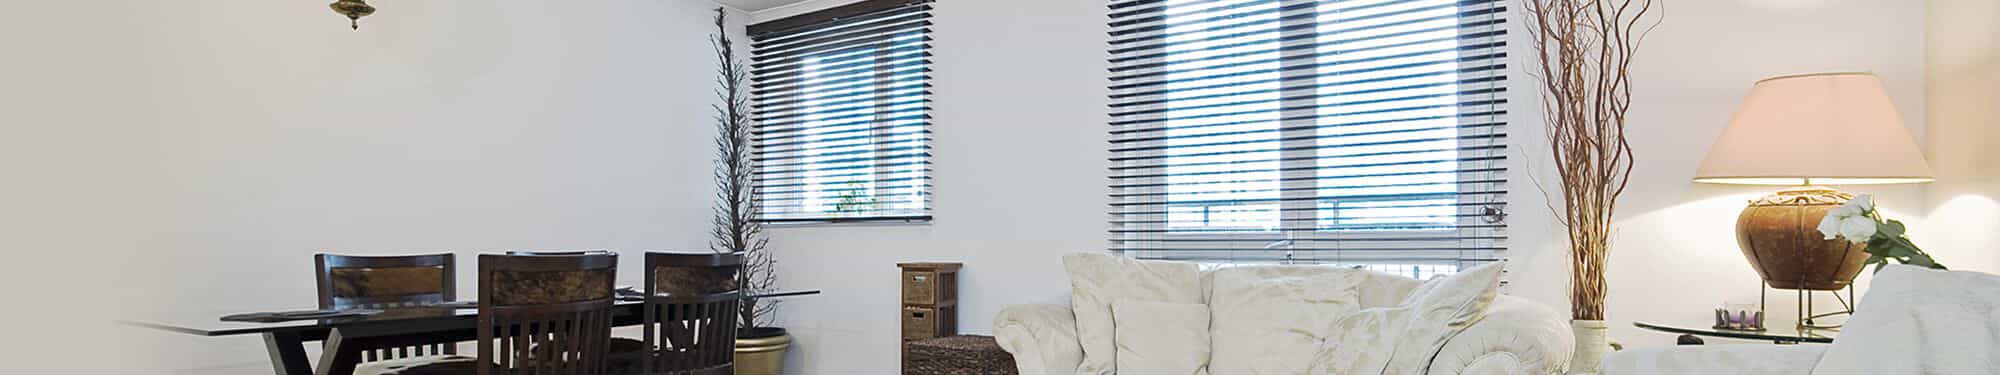 Bloomin' Blinds window blinds installation services in Bellevue